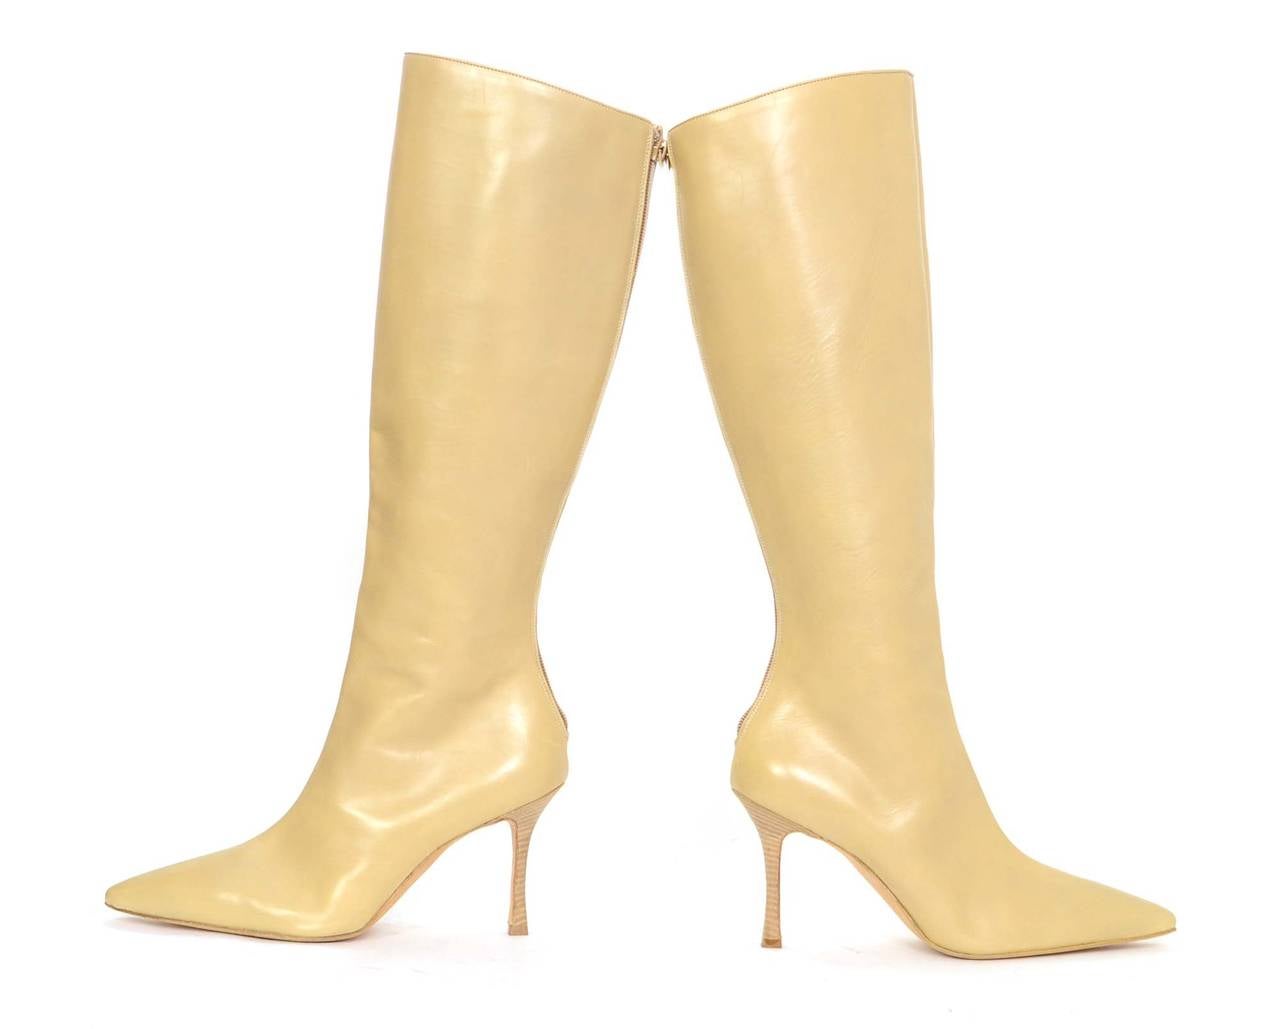 MANOLO BLAHNIK Nude Leather Tall Pointed Toe Boots sz 39 2